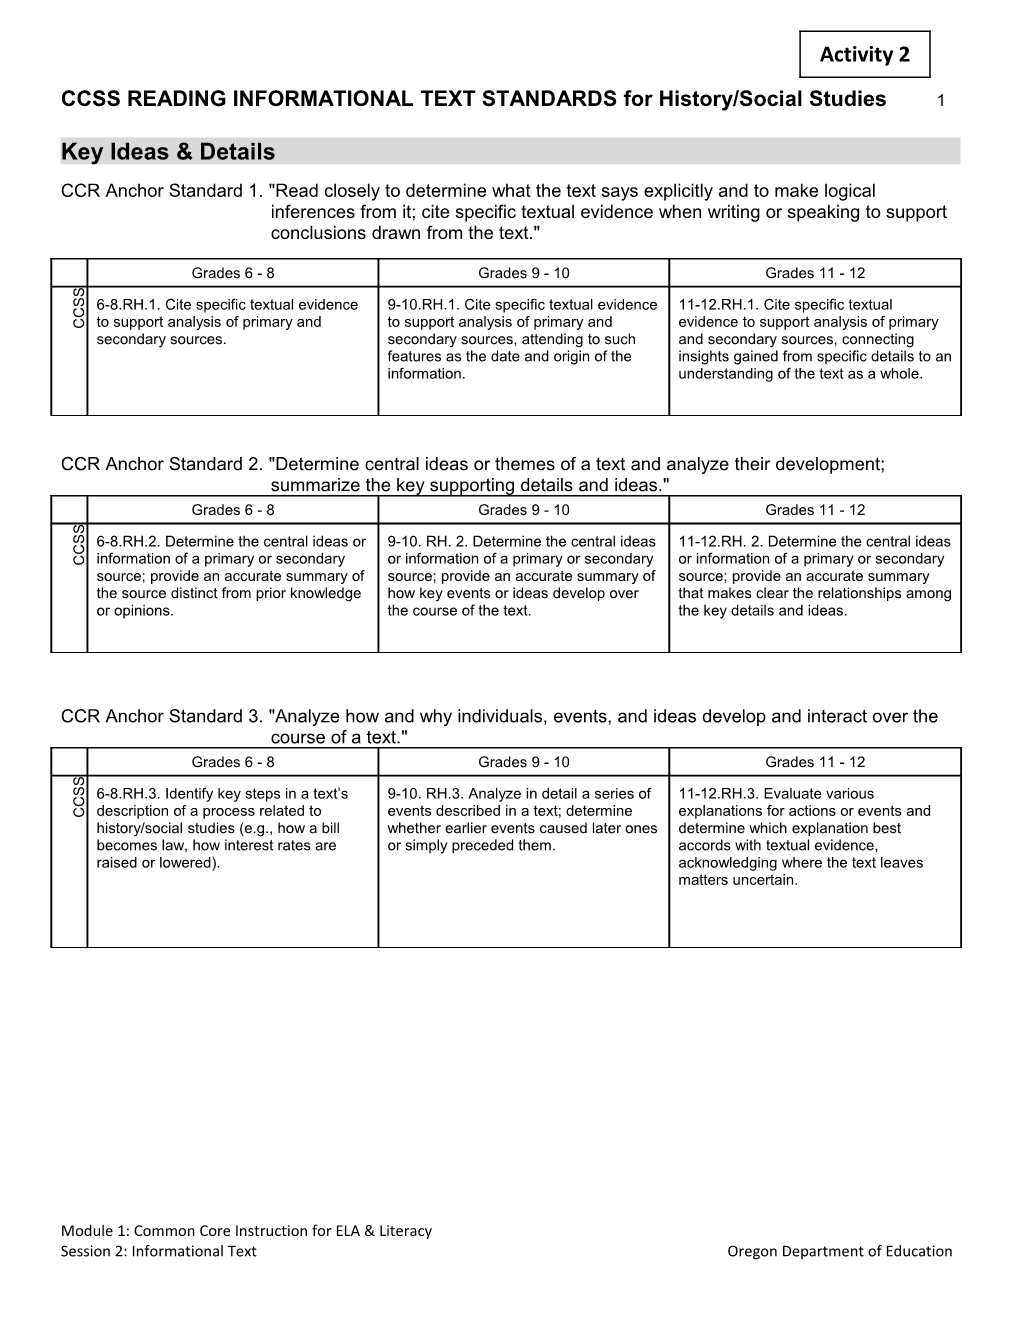 CCSS READING INFORMATIONAL TEXT STANDARDS for History/Social Studies 1